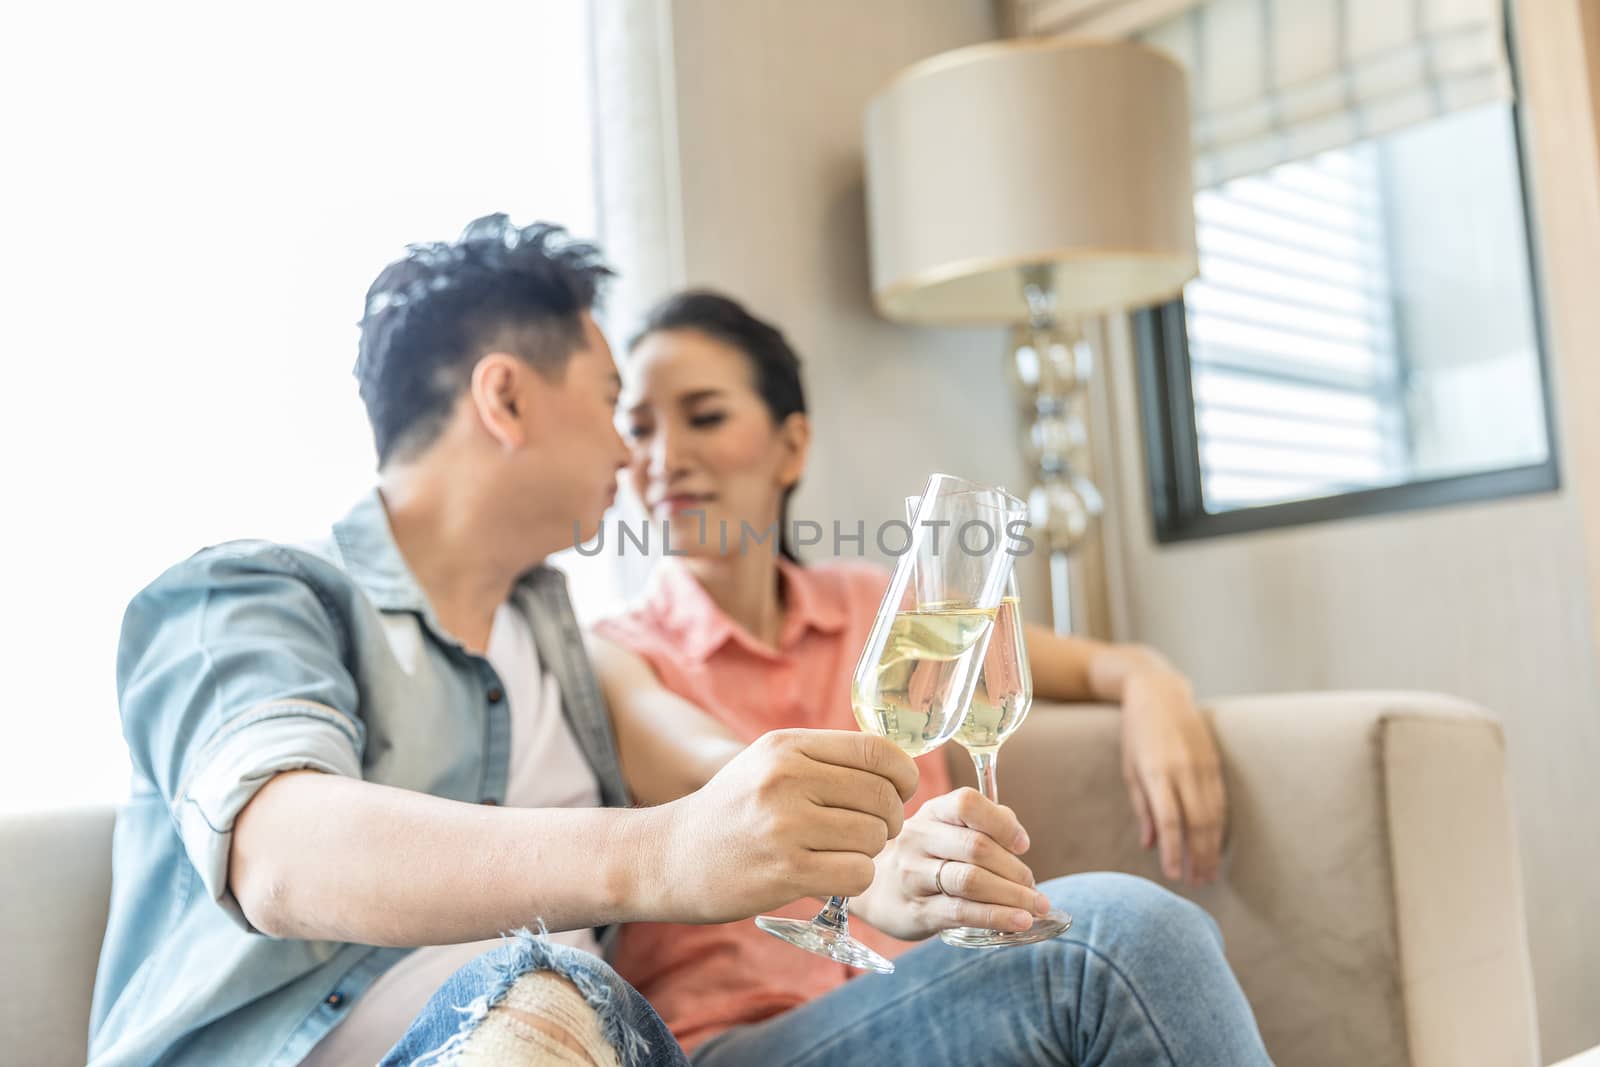 Young Couples celebrate together with wine  in bedroom of contemporary house for modern lifestyle concept (Focus at glasses)